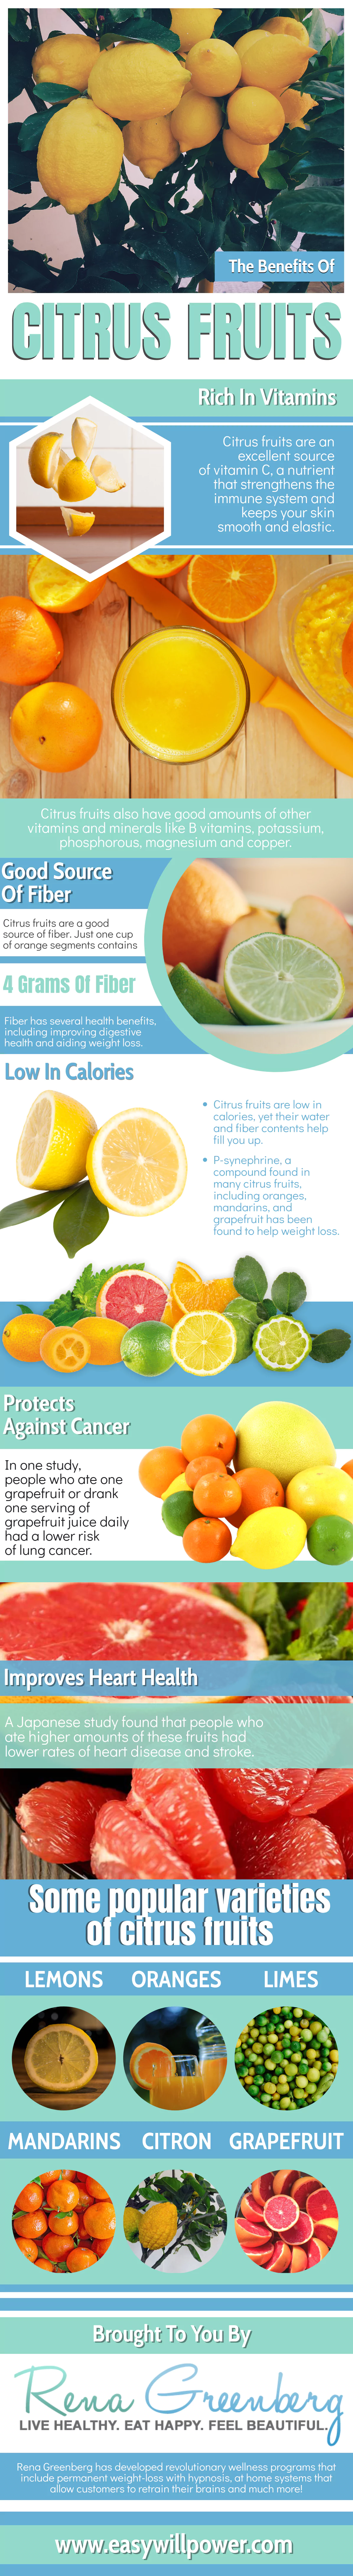 The Benefits of Citrus Fruits